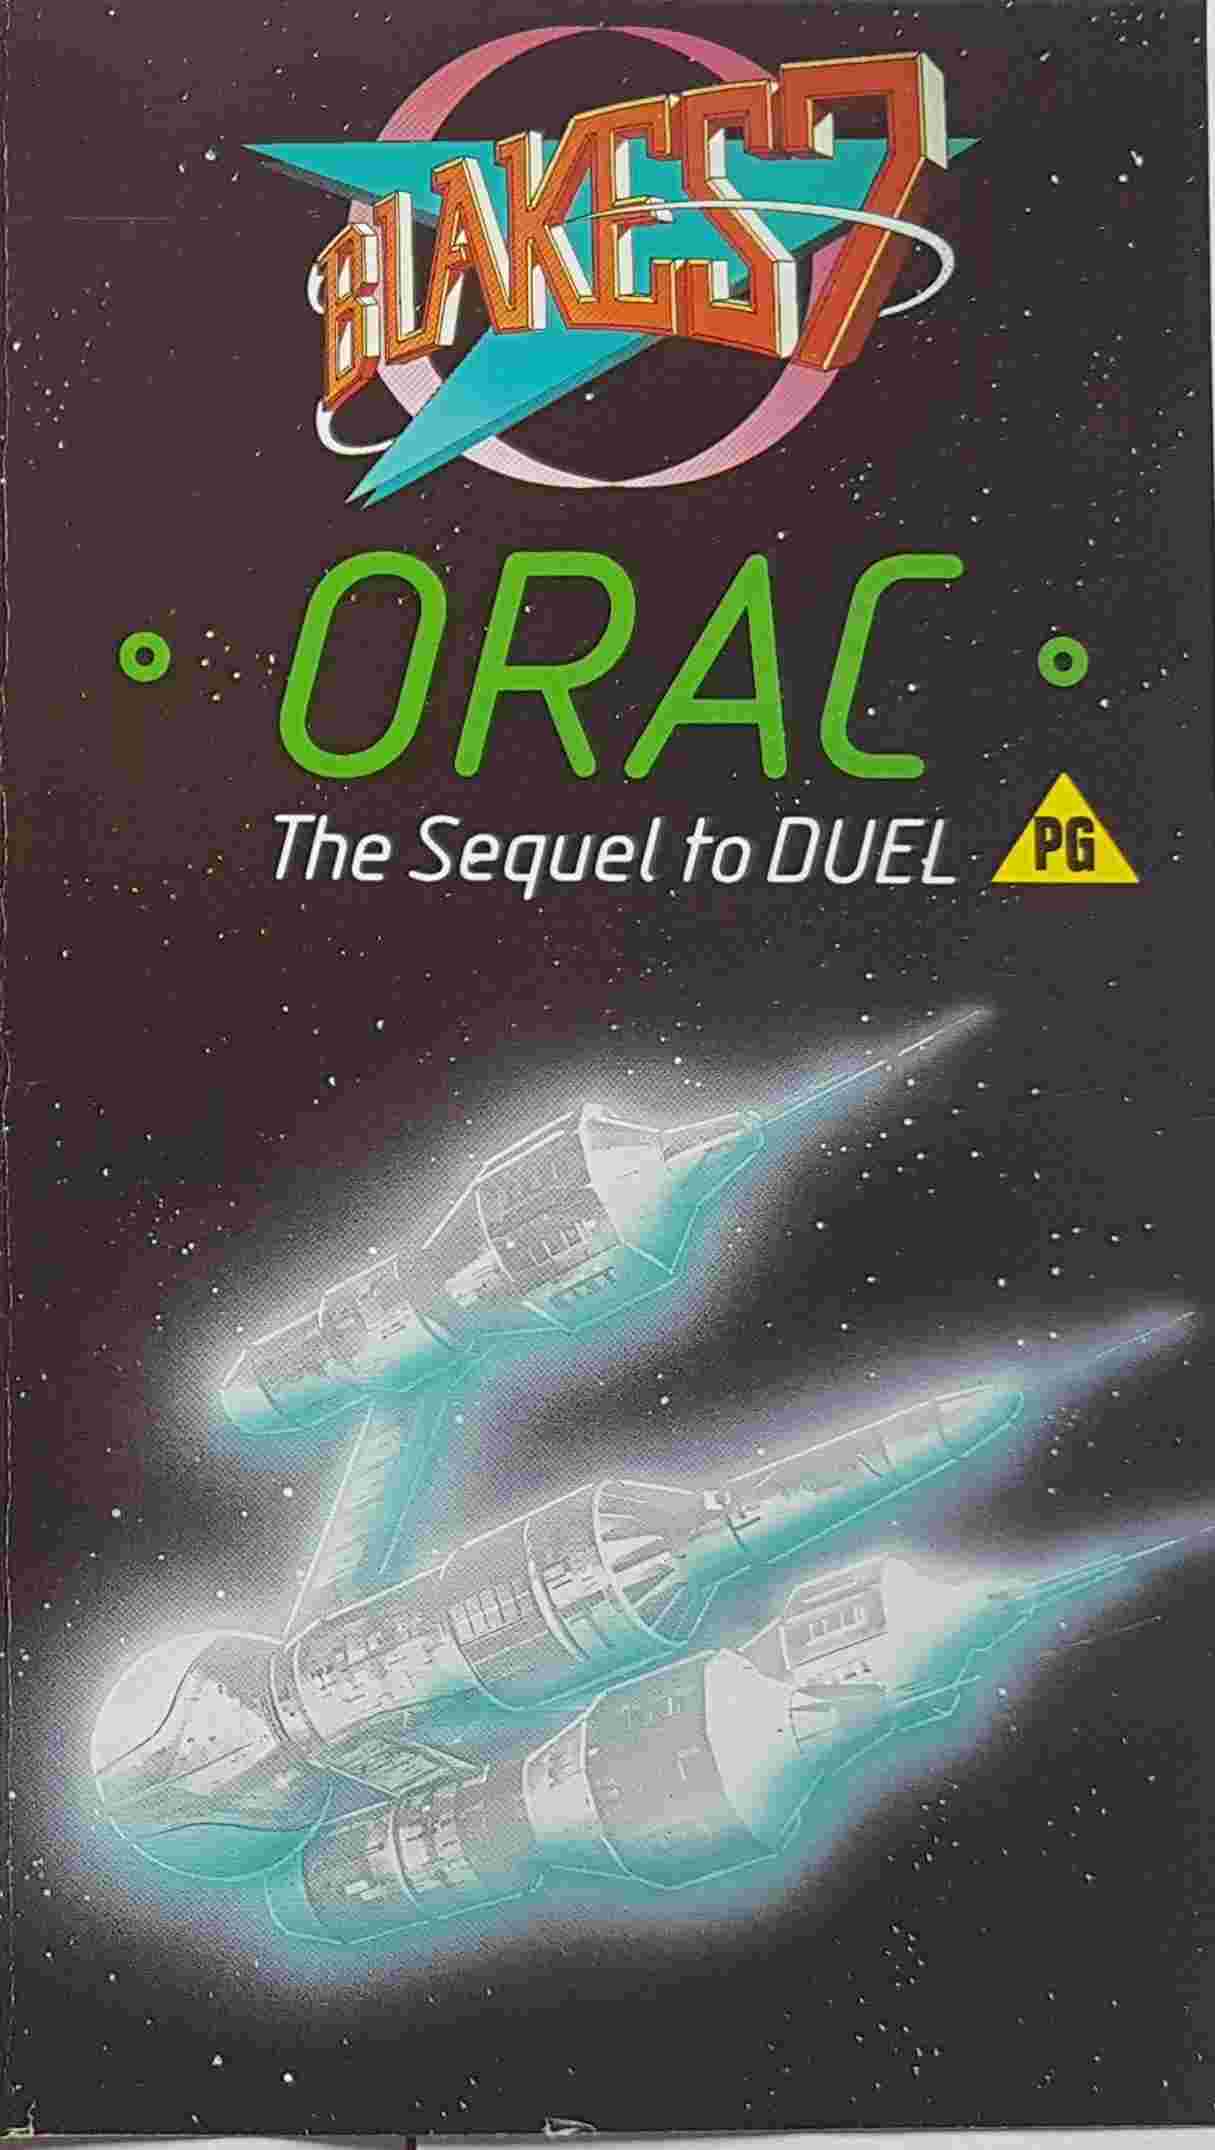 Picture of BBCV 2037 Blake's 7 - Orac by artist Unknown from the BBC videos - Records and Tapes library